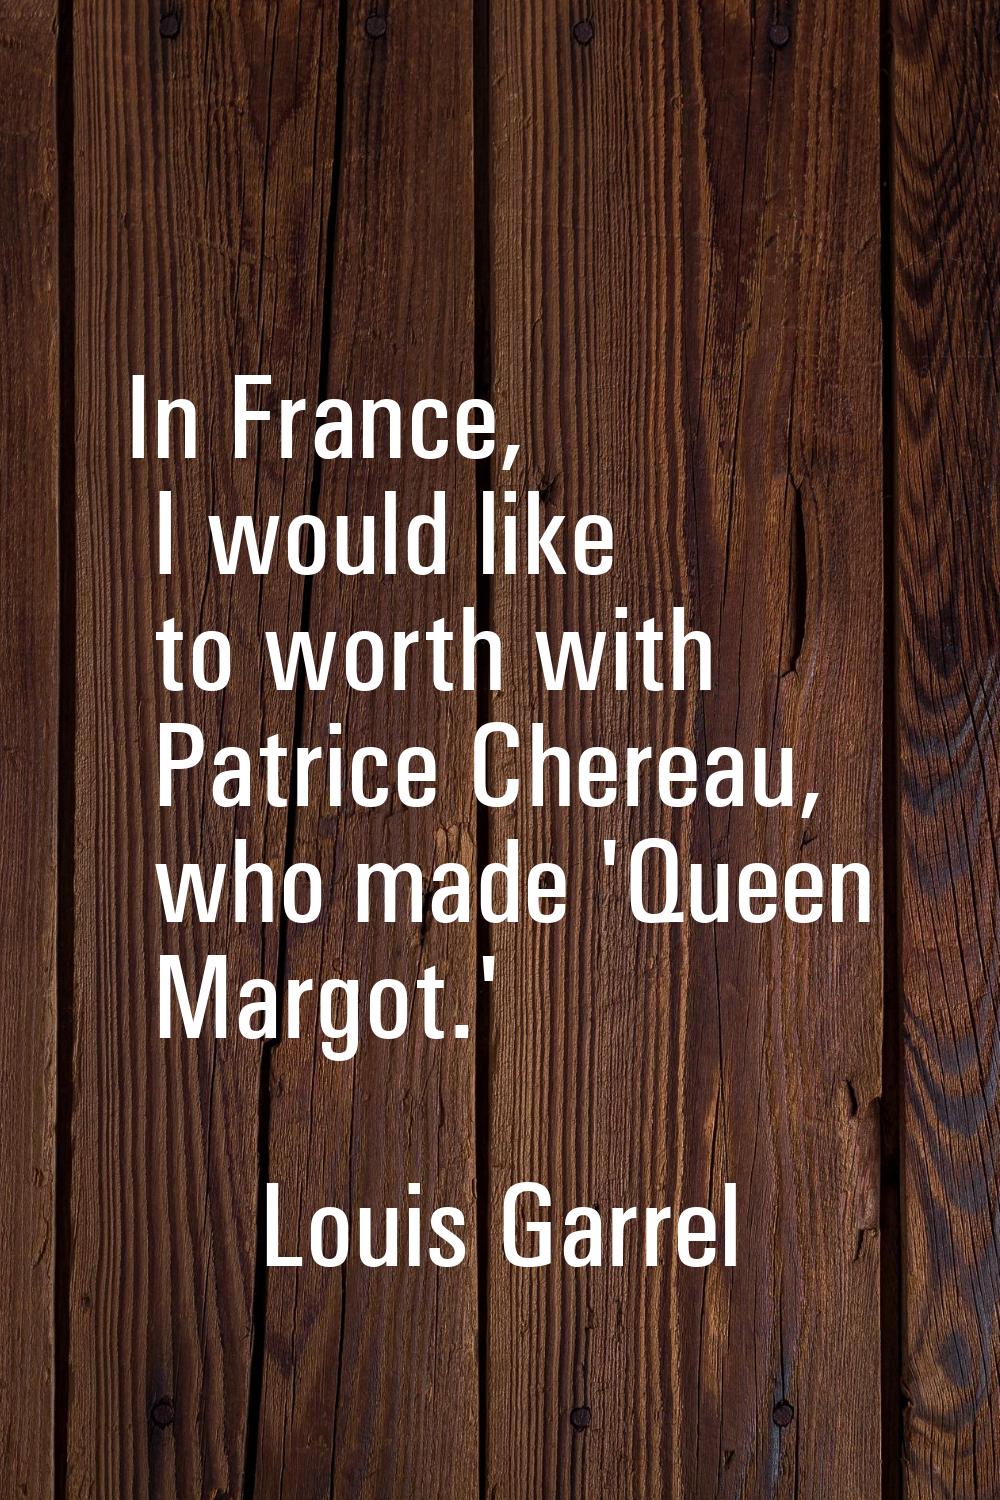 In France, I would like to worth with Patrice Chereau, who made 'Queen Margot.'